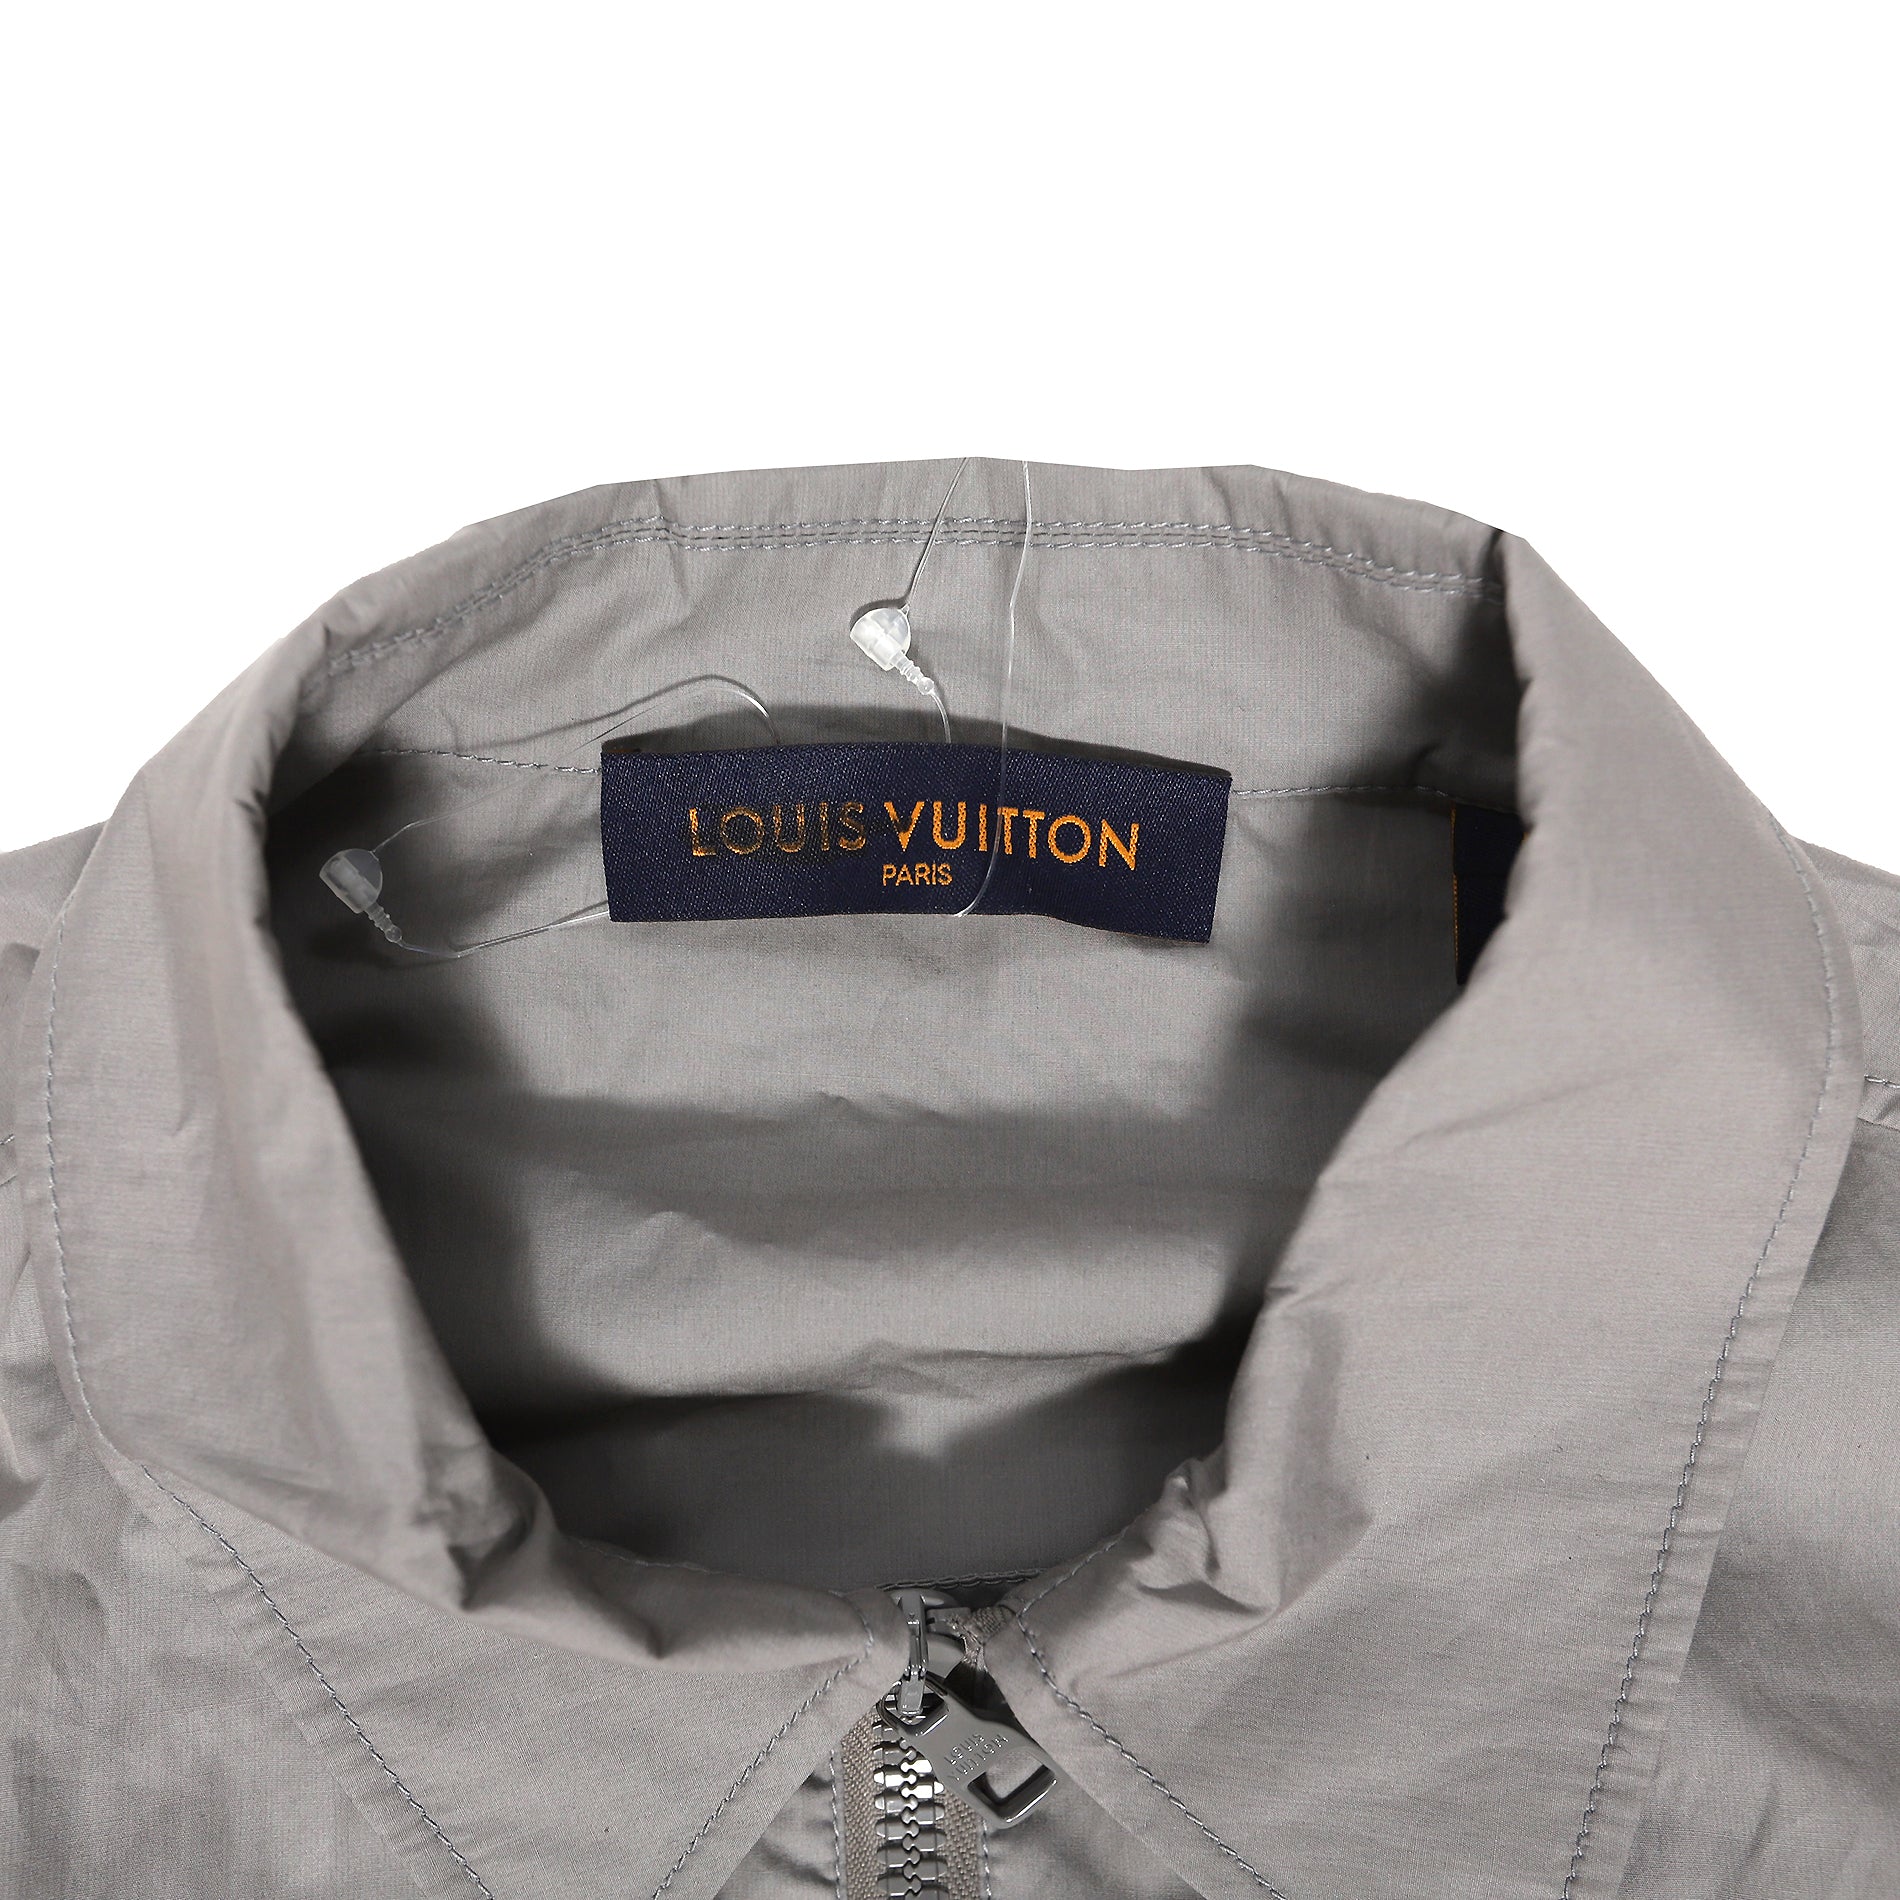 Louis Vuitton FW19 Gray Backpack Shirt by Virgil Abloh